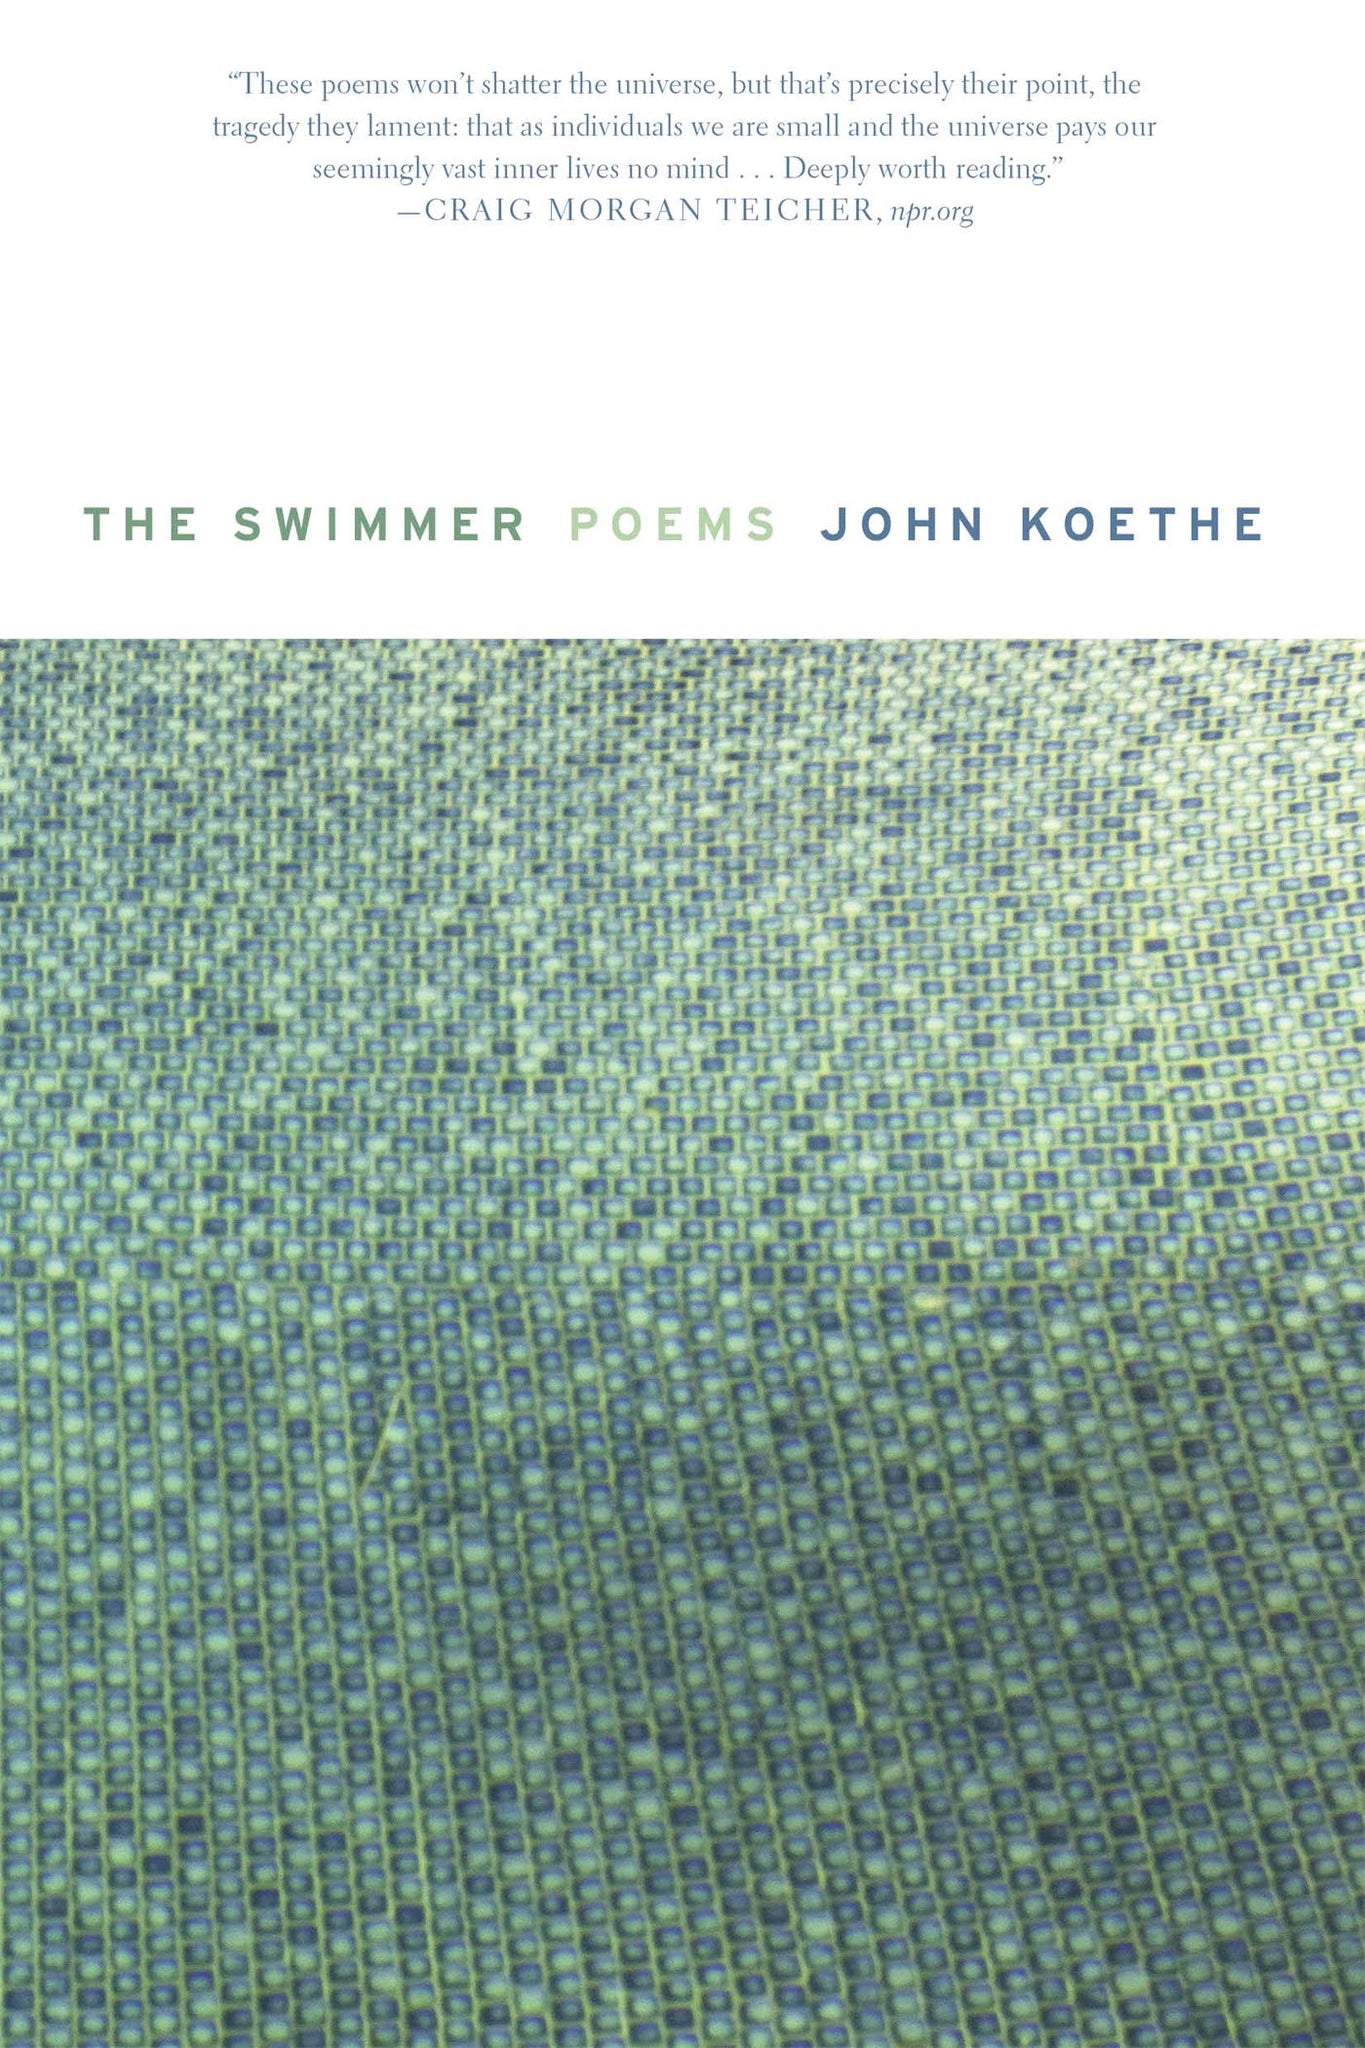 The Swimmer: Poems